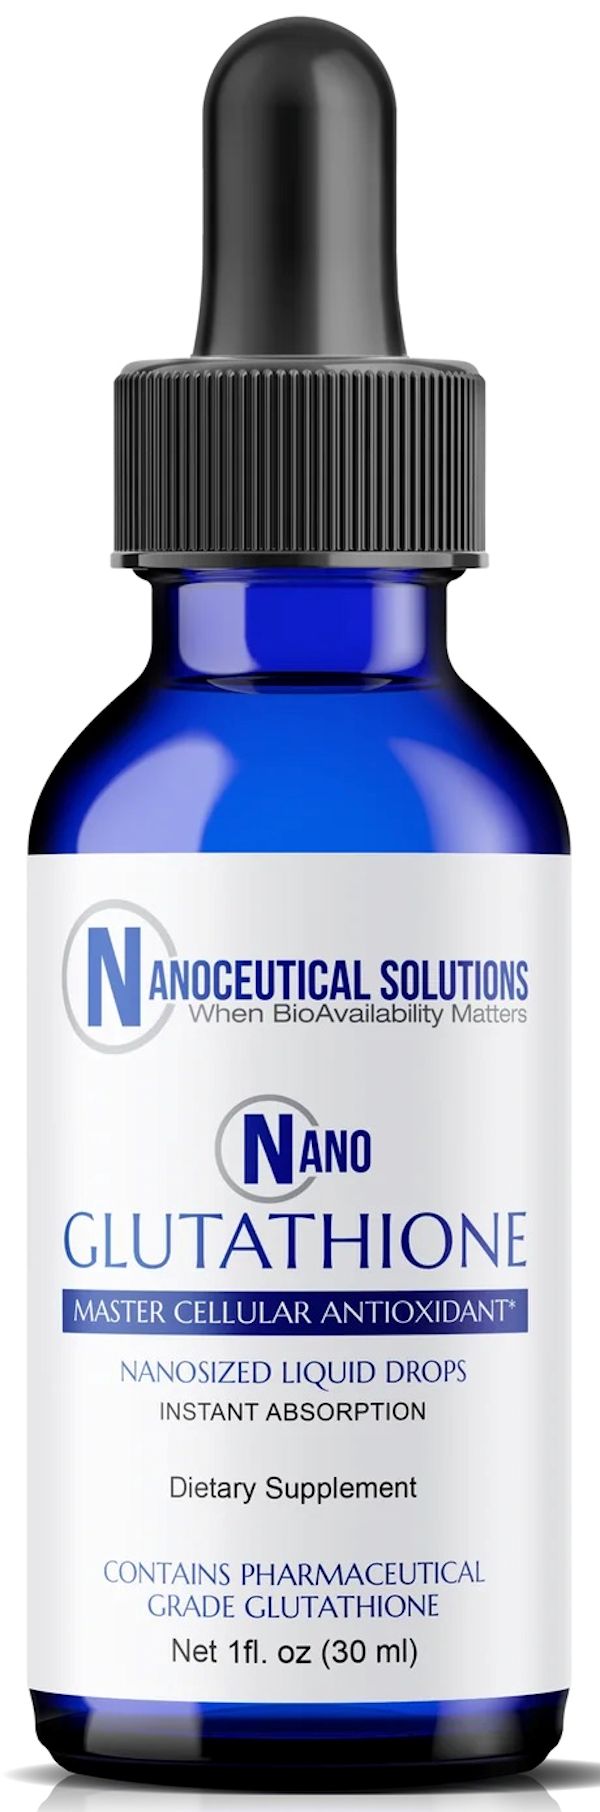 Nanoceutical Solutions Nano Glutathione Sublingual Up to 8 Times Higher than Glutathione Capsules